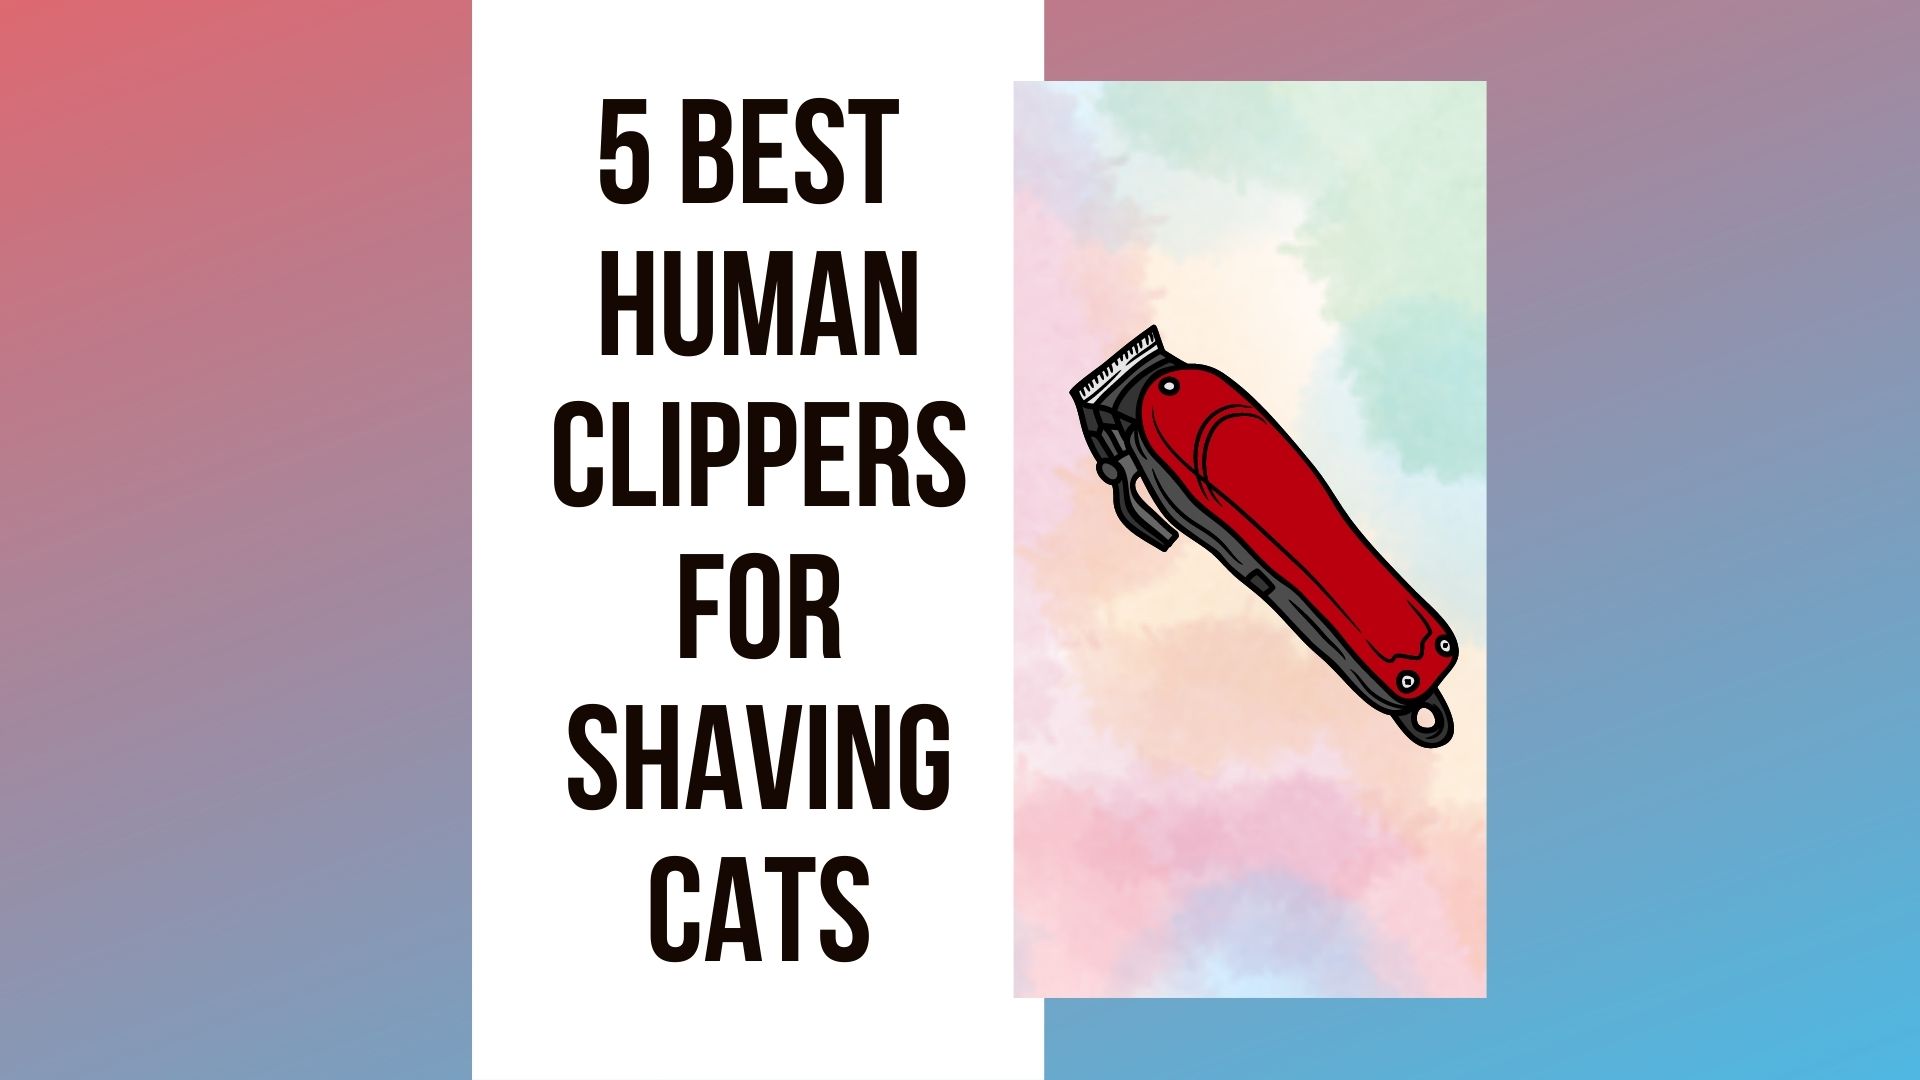 Can You Shave a Cat With Human Clippers? 5 Options